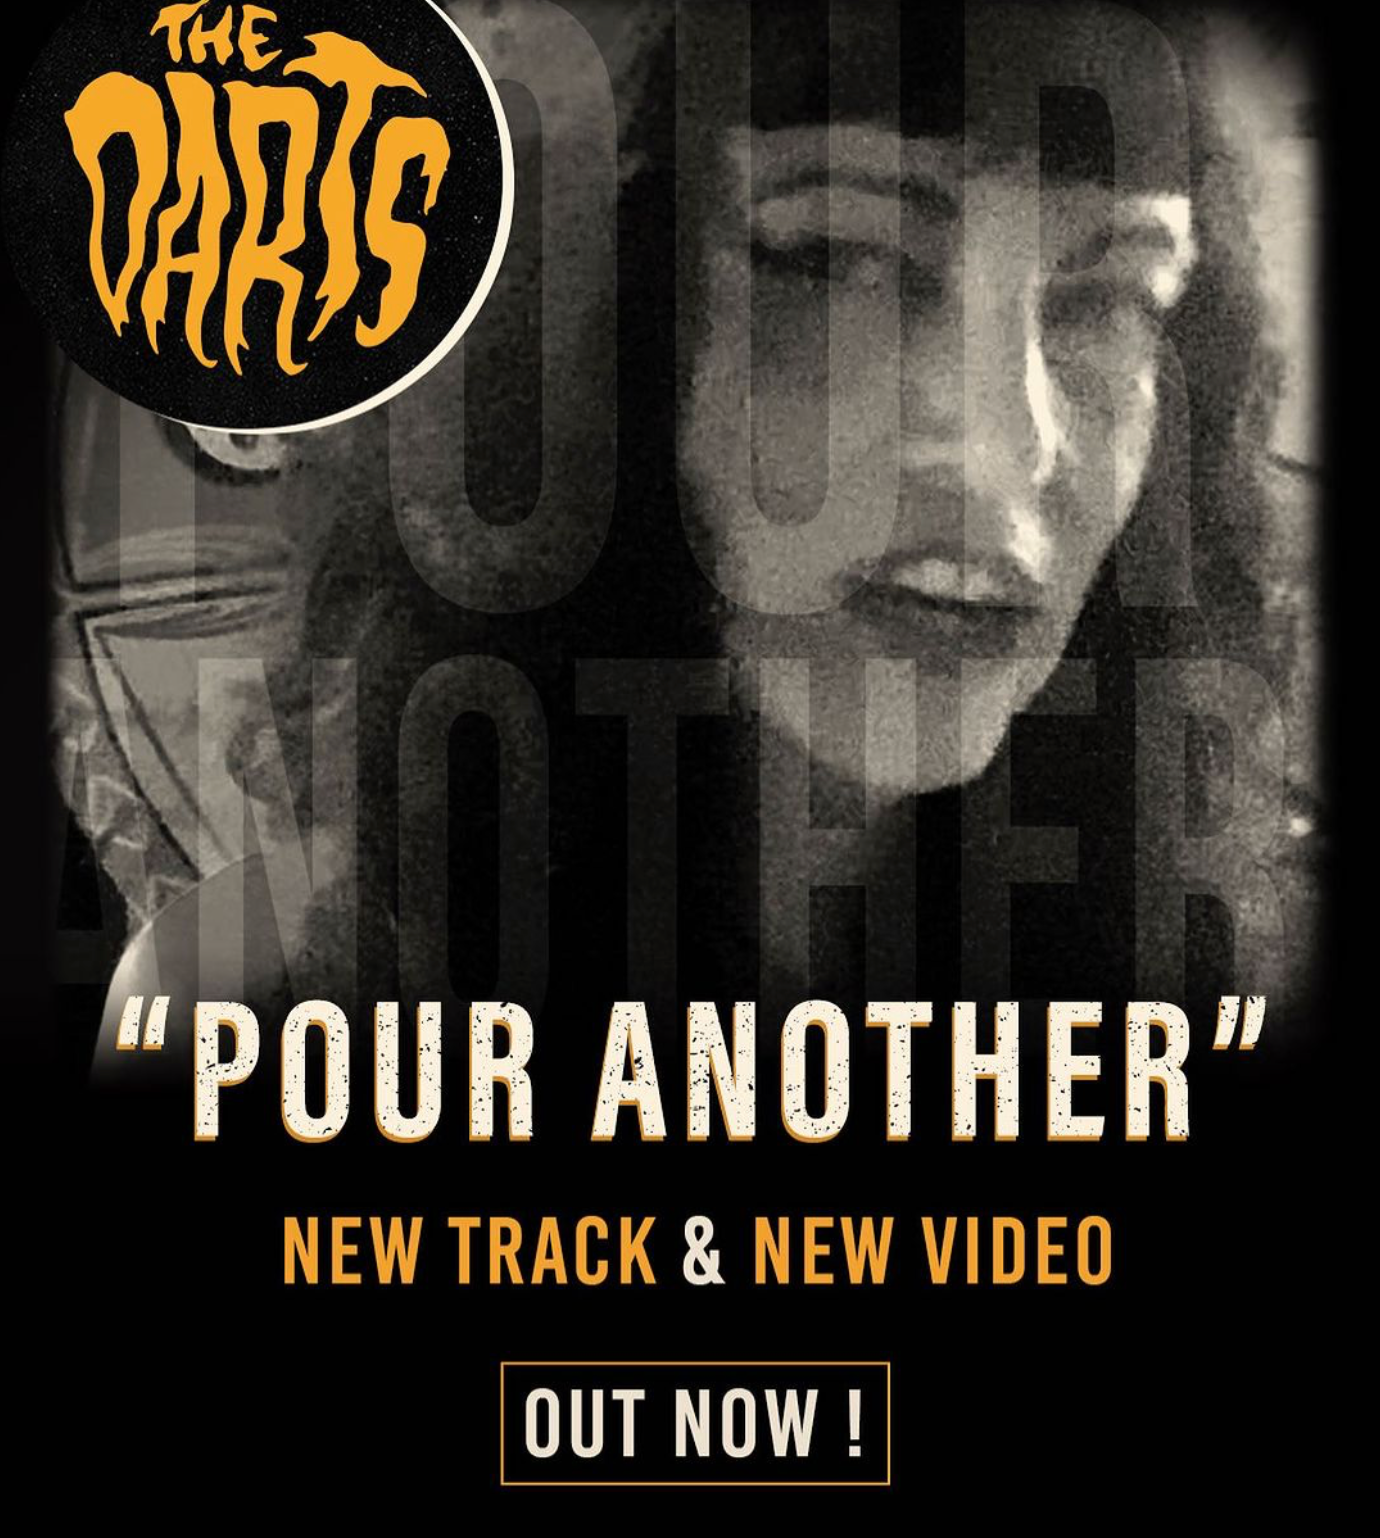 NEW VIDEO: THE DARTS "POUR ANOTHER"